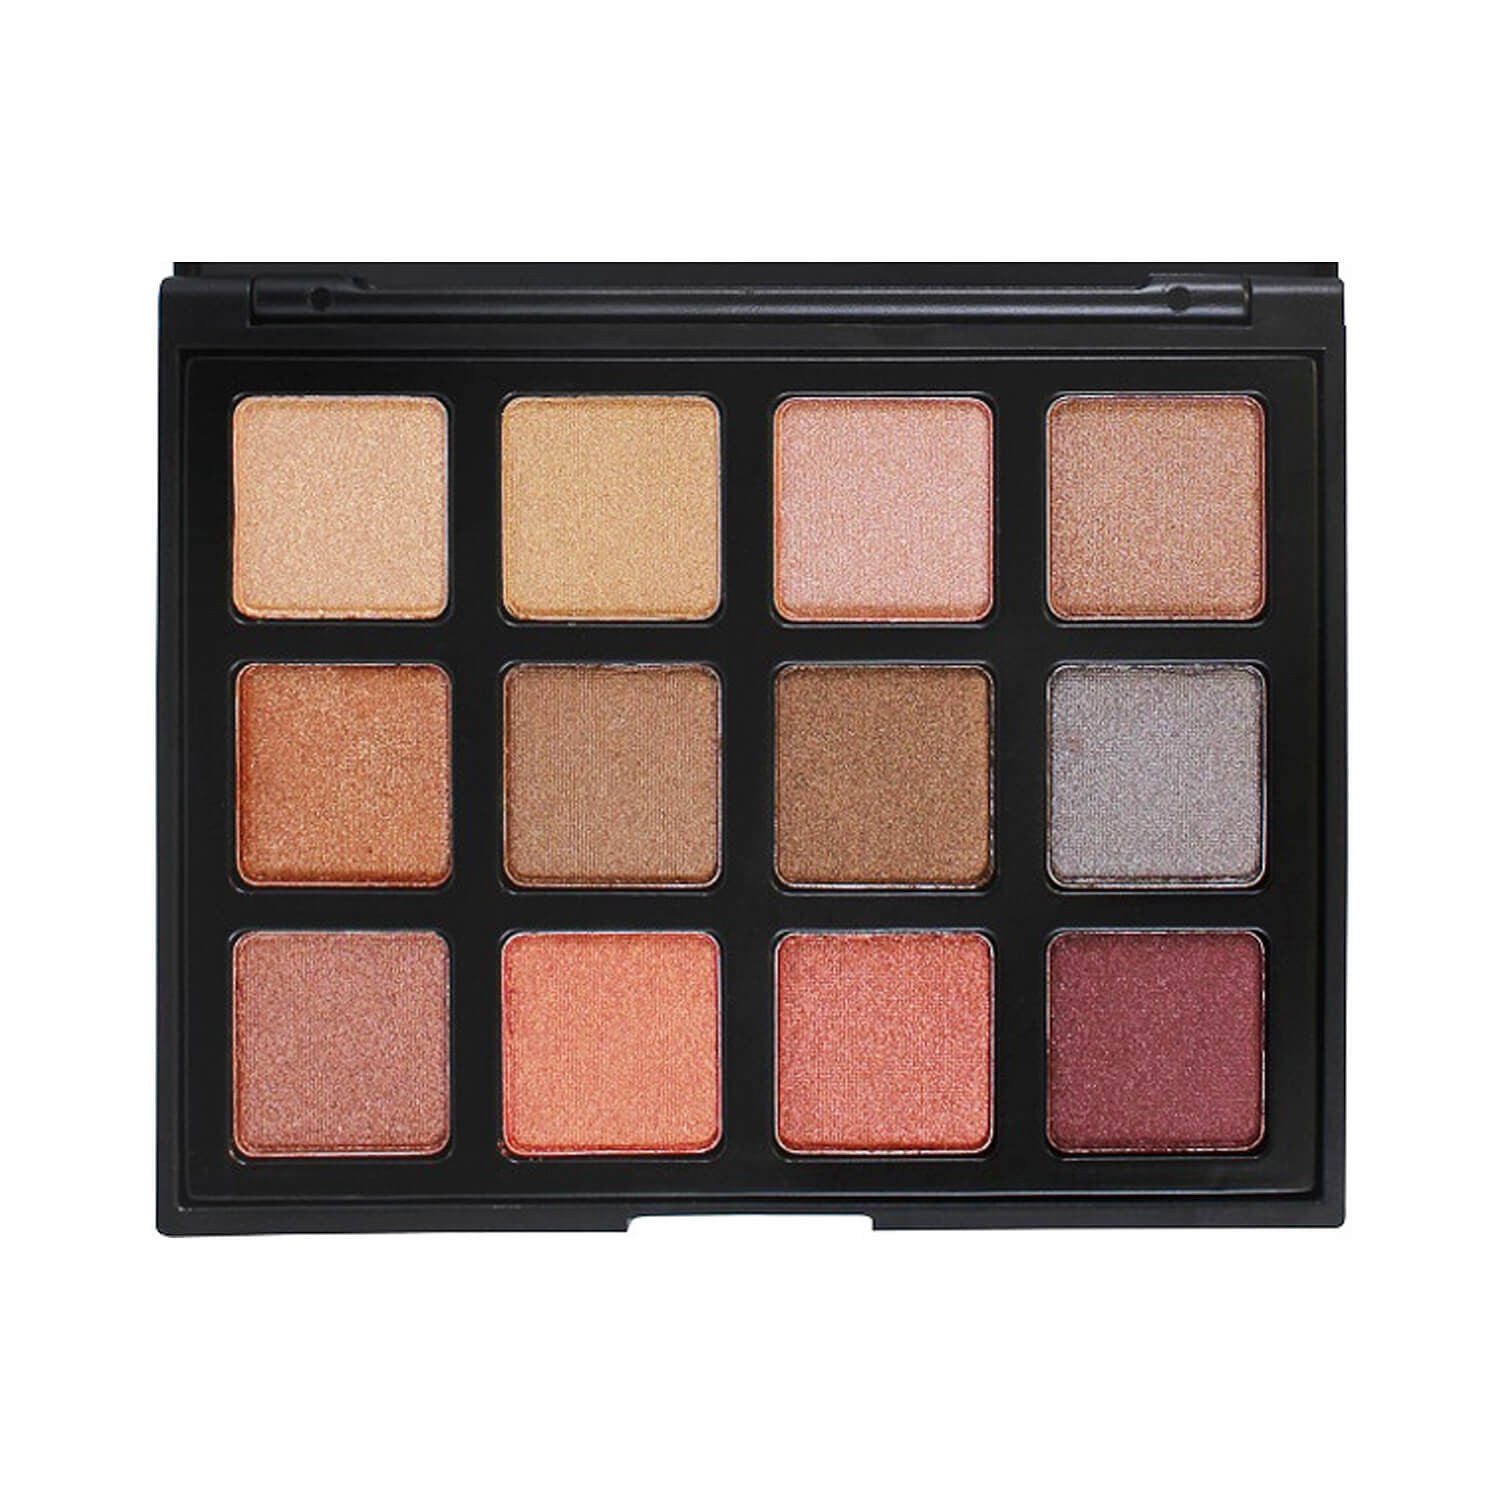 Morphe Cosmetics 12S Soul Of Summer Palette Pick Me Up Collection